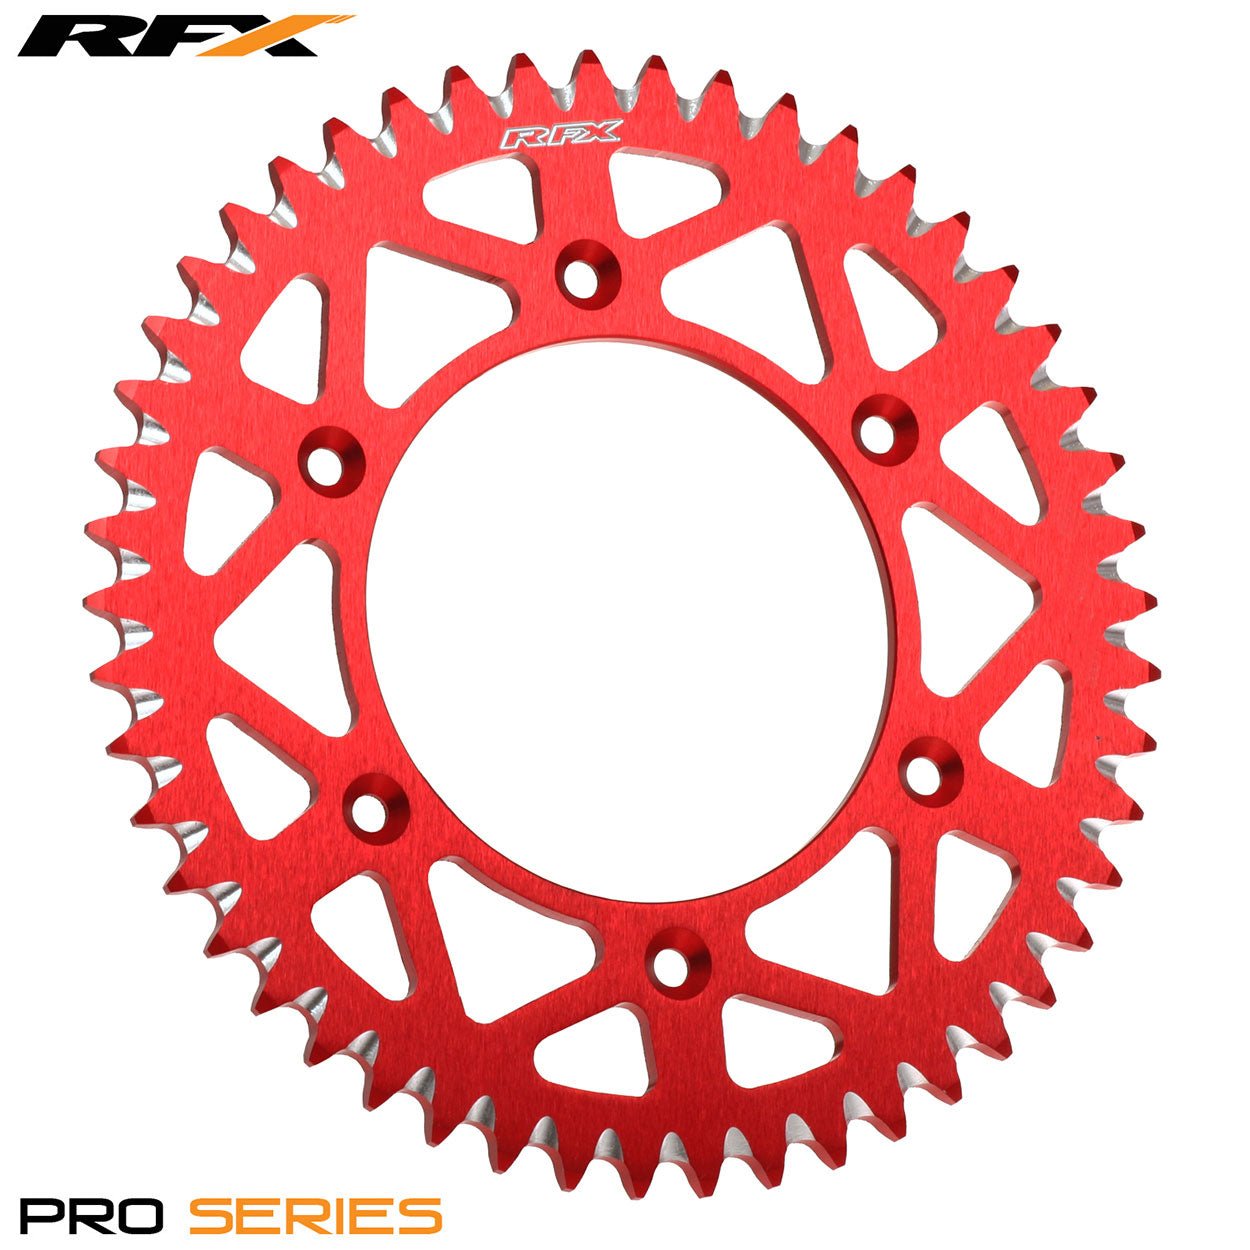 RFX Pro Series Elite Rear Sprocket Husqvarna 125-610 Up To 2013 Gas Gas EC125-300 All Years (Red 53T - Red - RFX